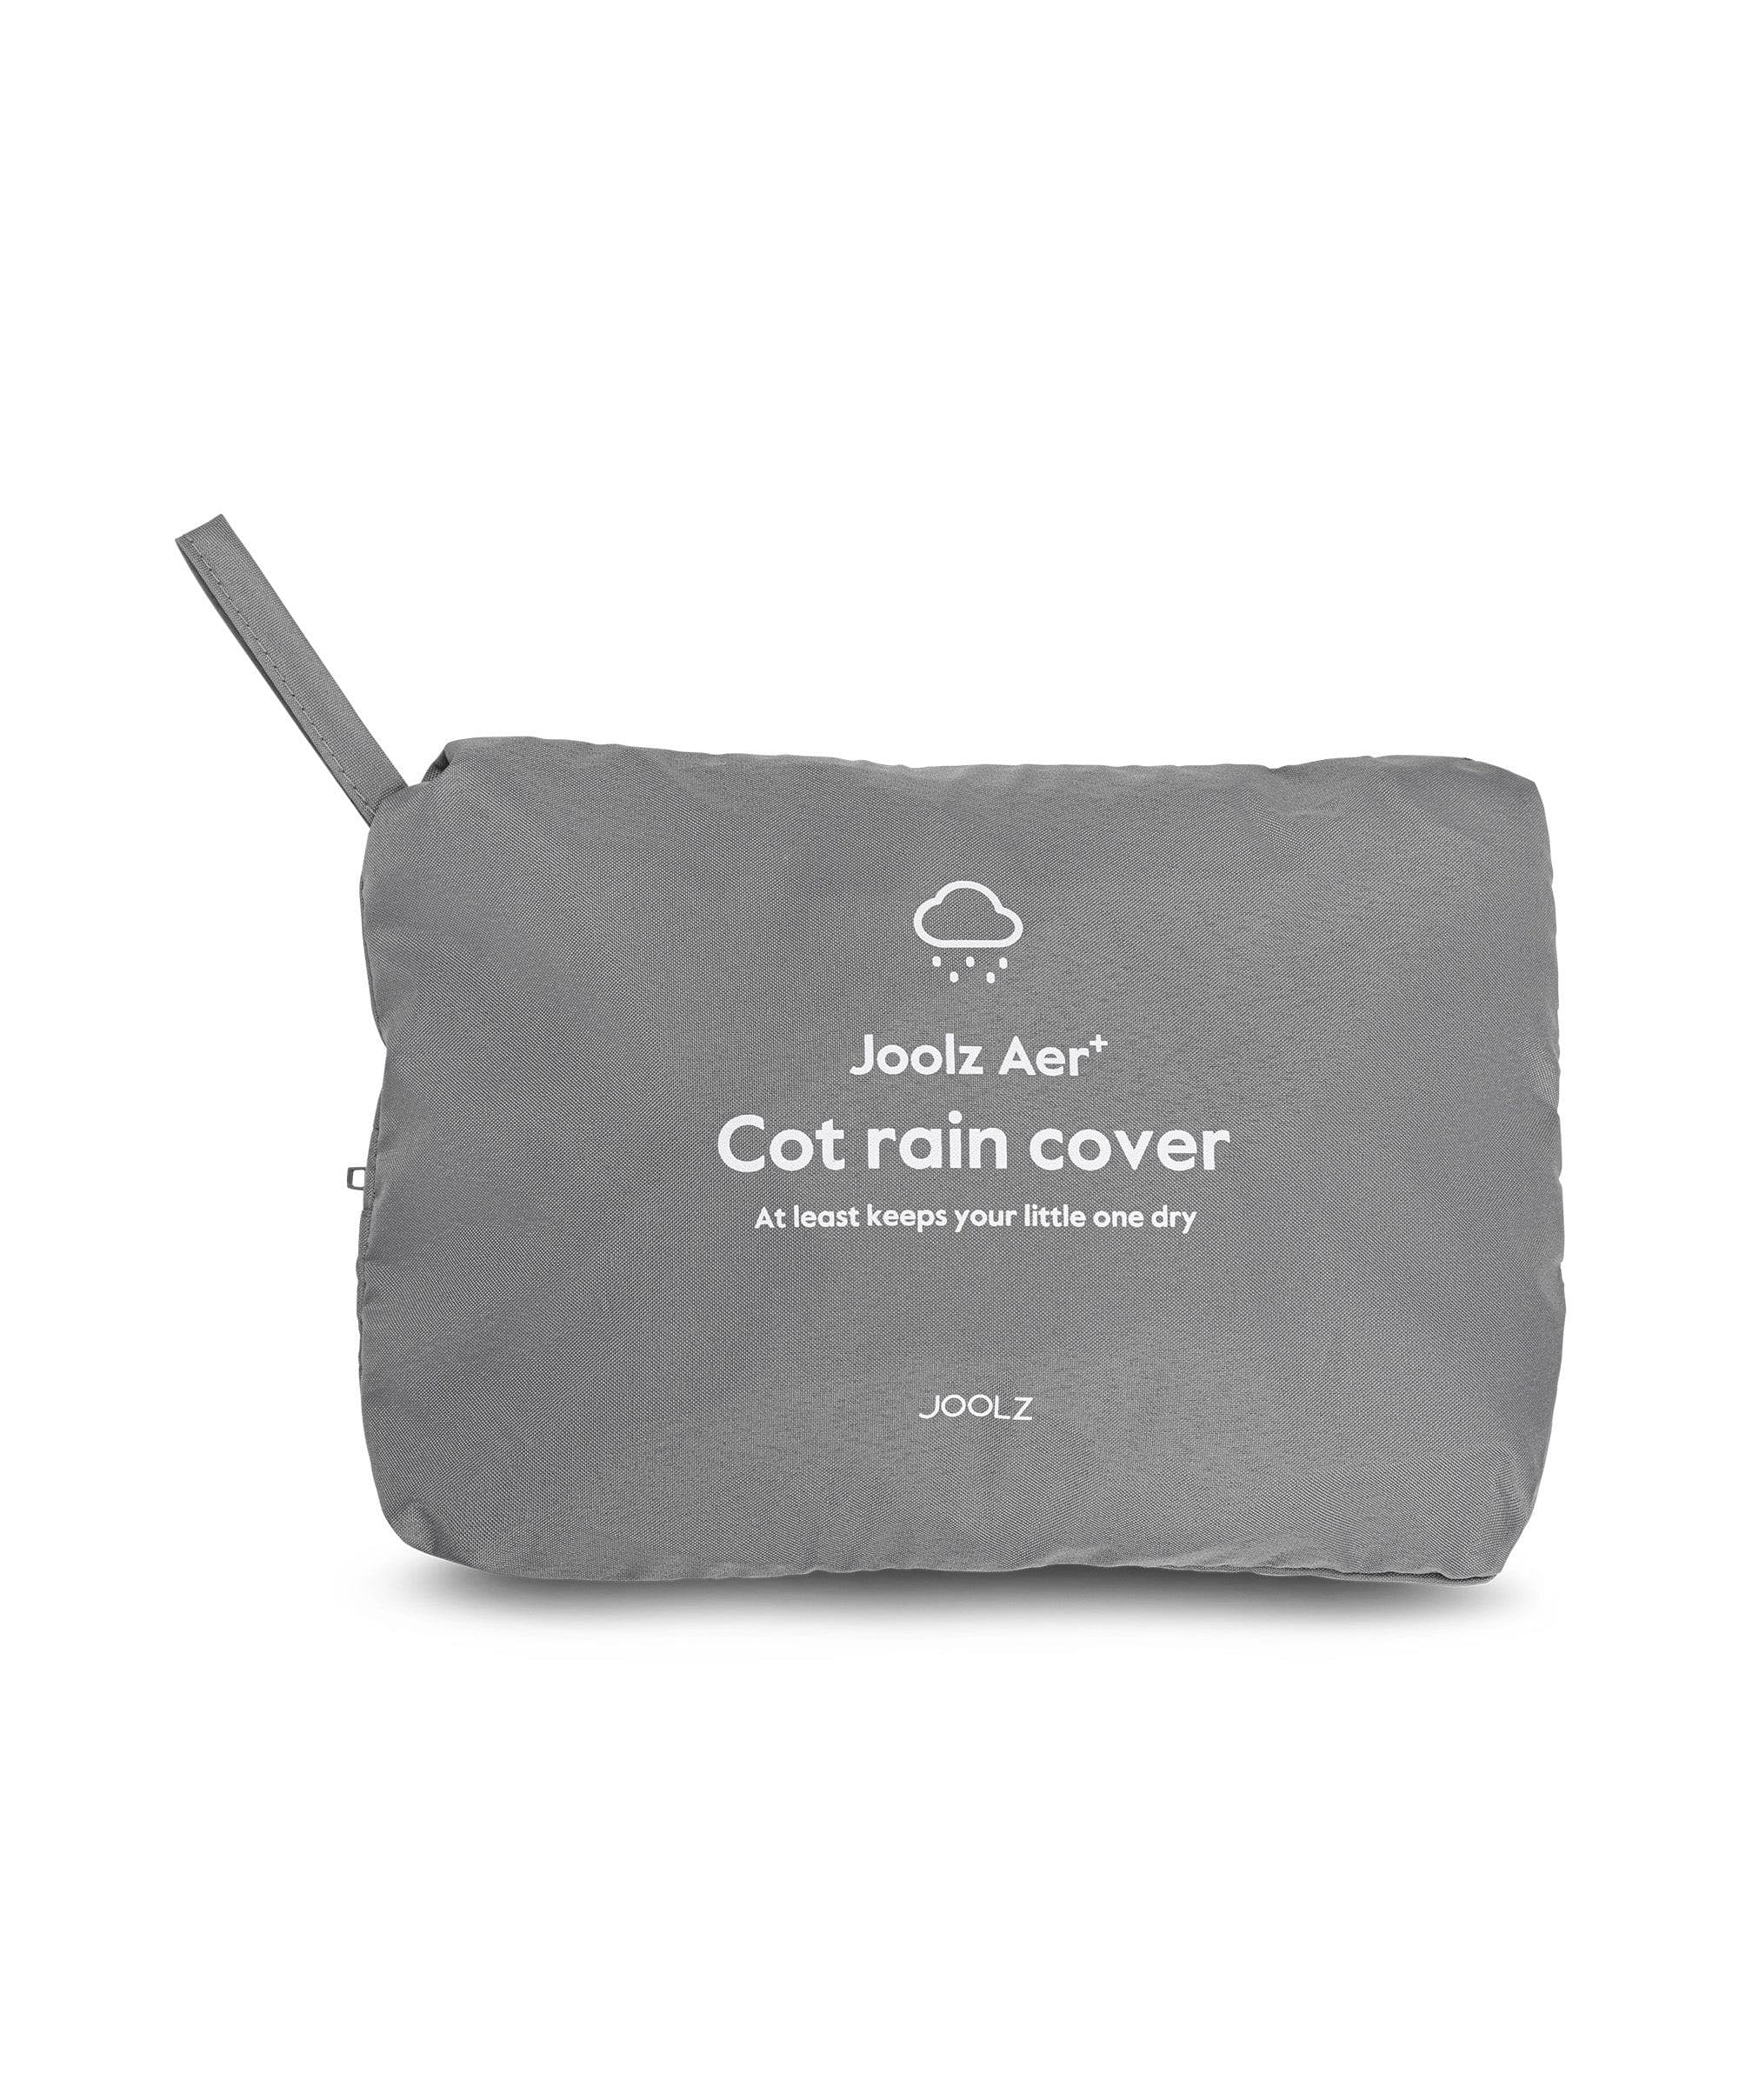 Joolz Aer+ Cot rain cover in Grey